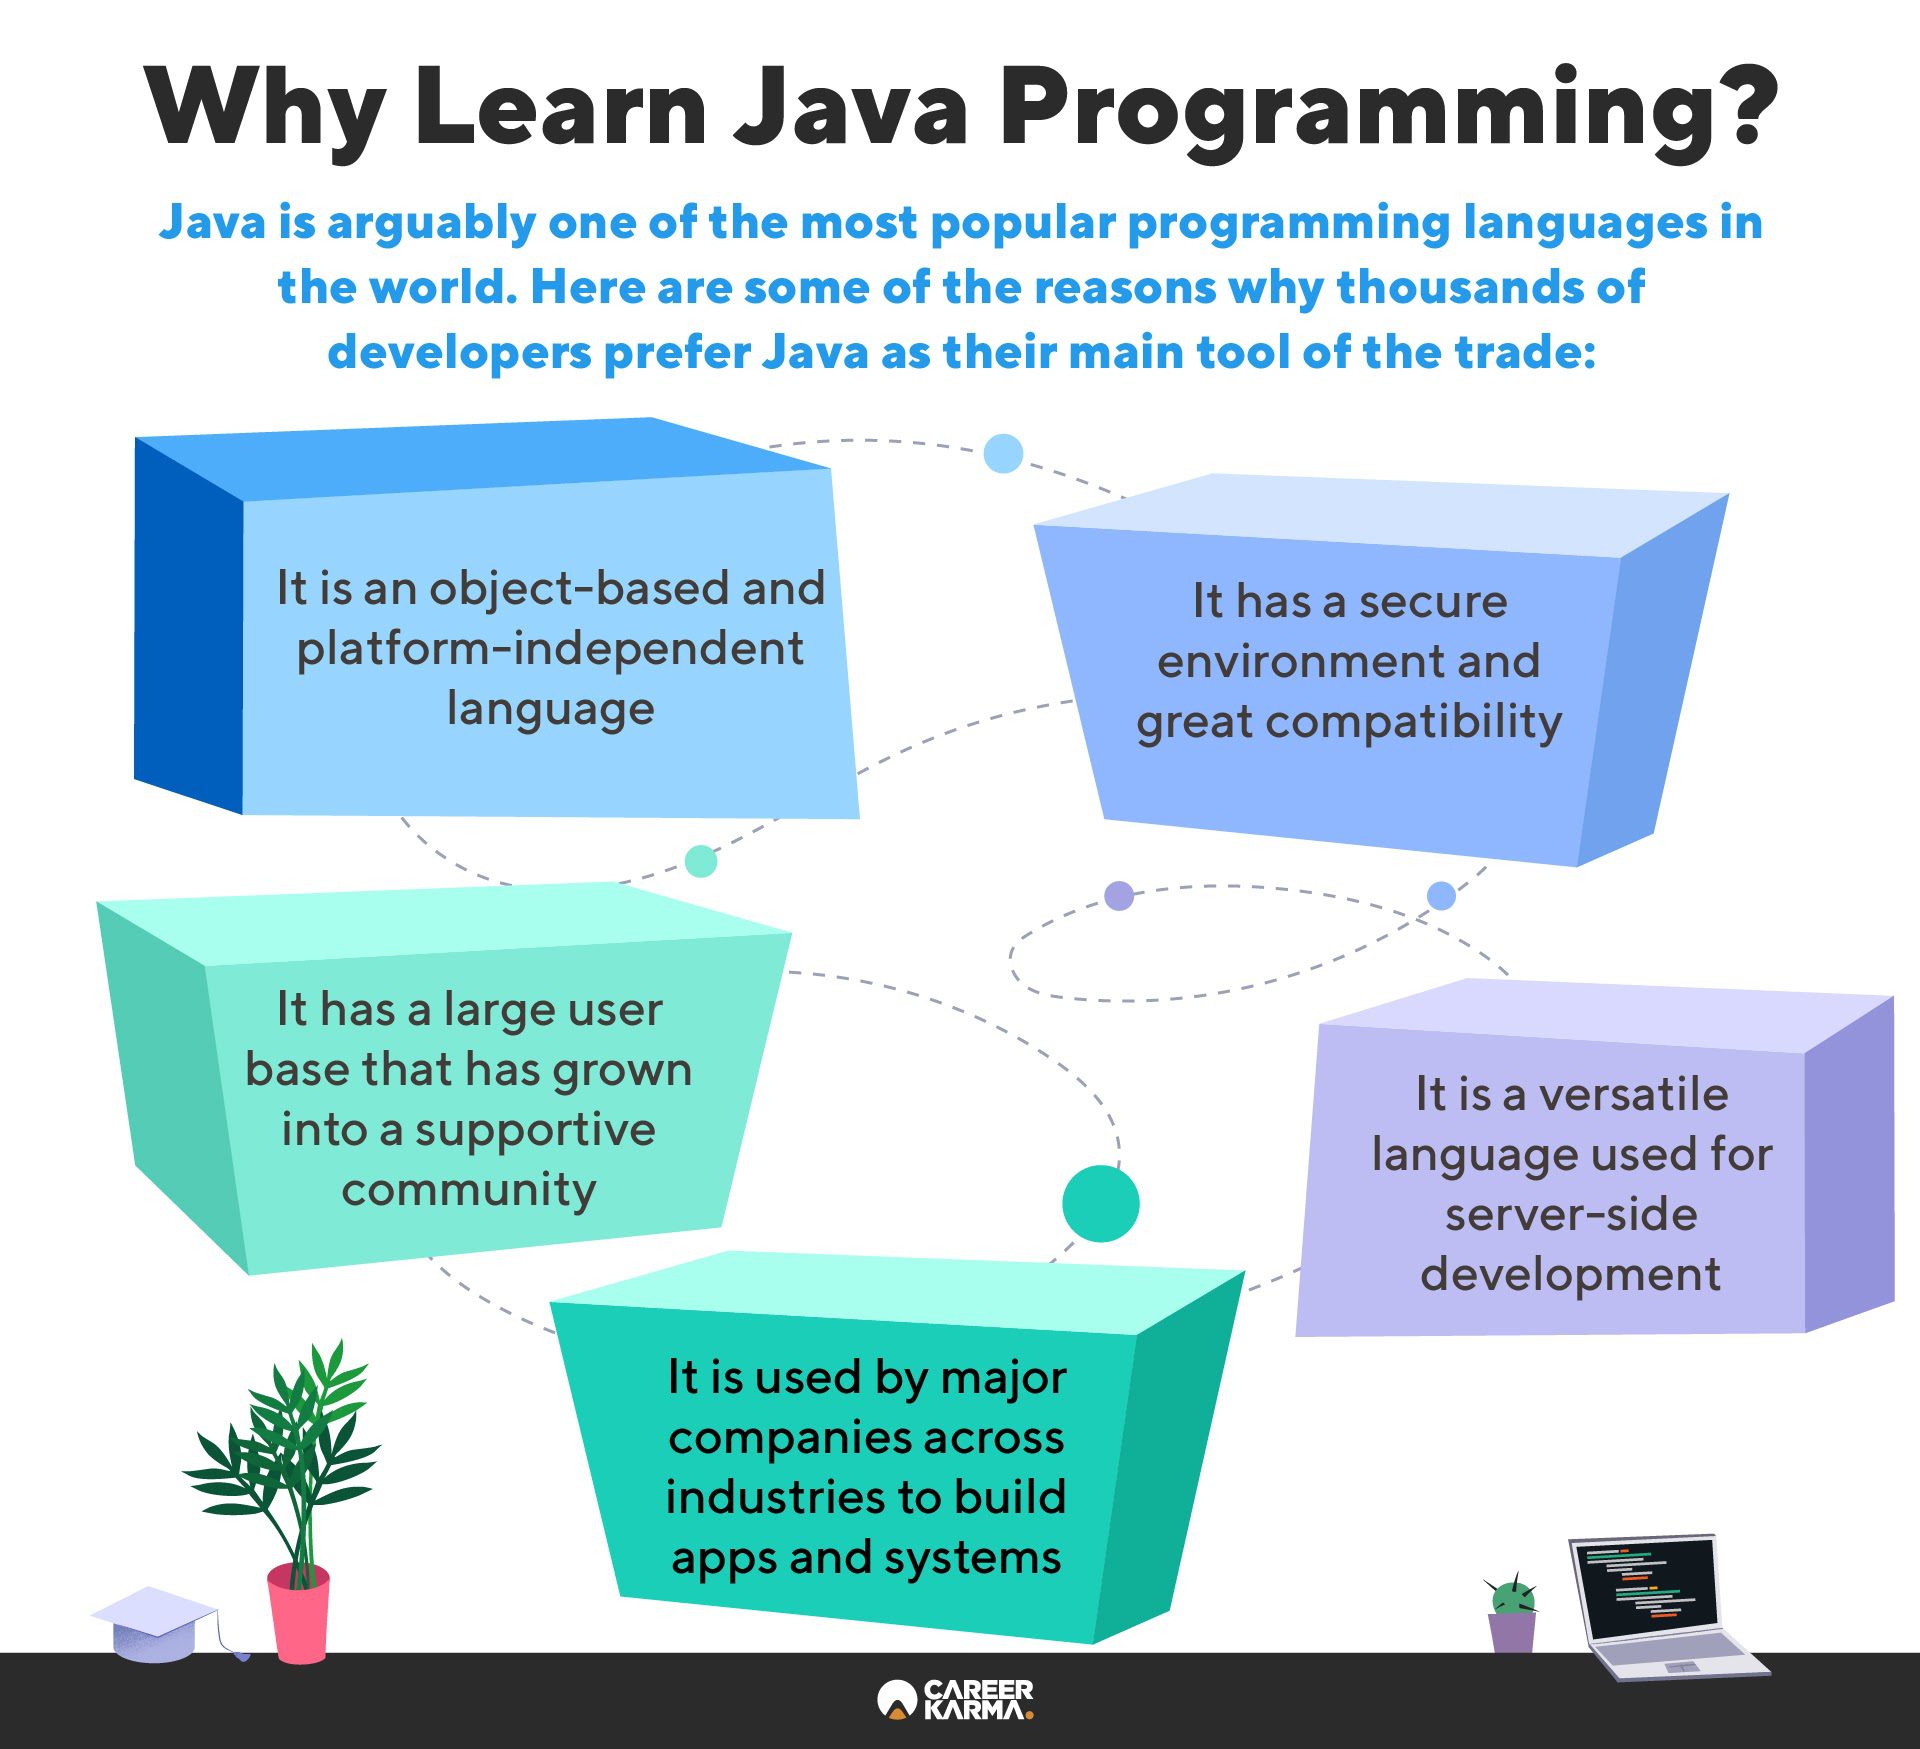 An infographic covering the top reasons to learn Java programming